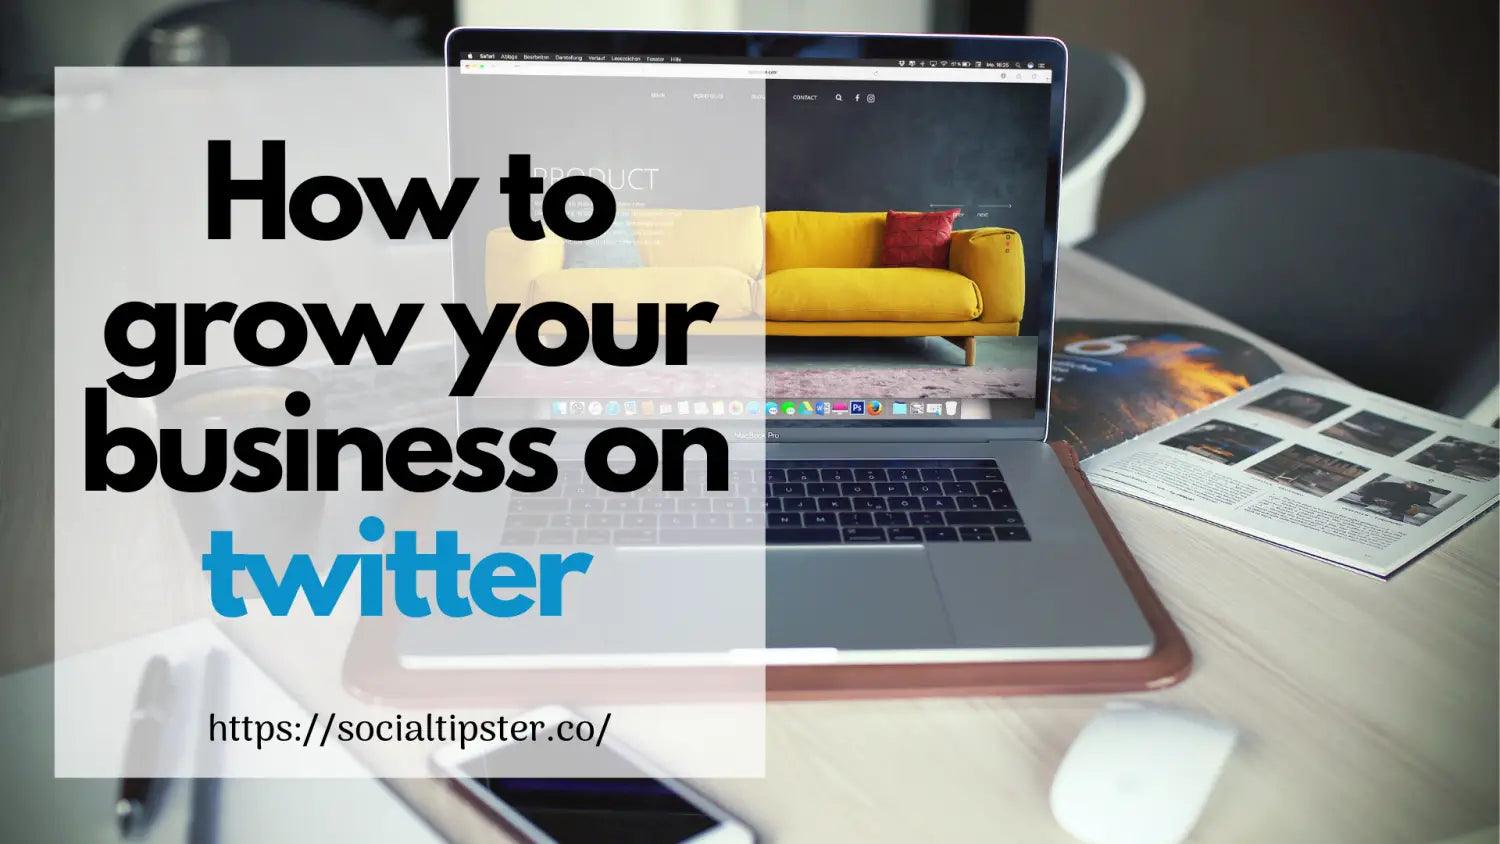 How to grow your business on twitter